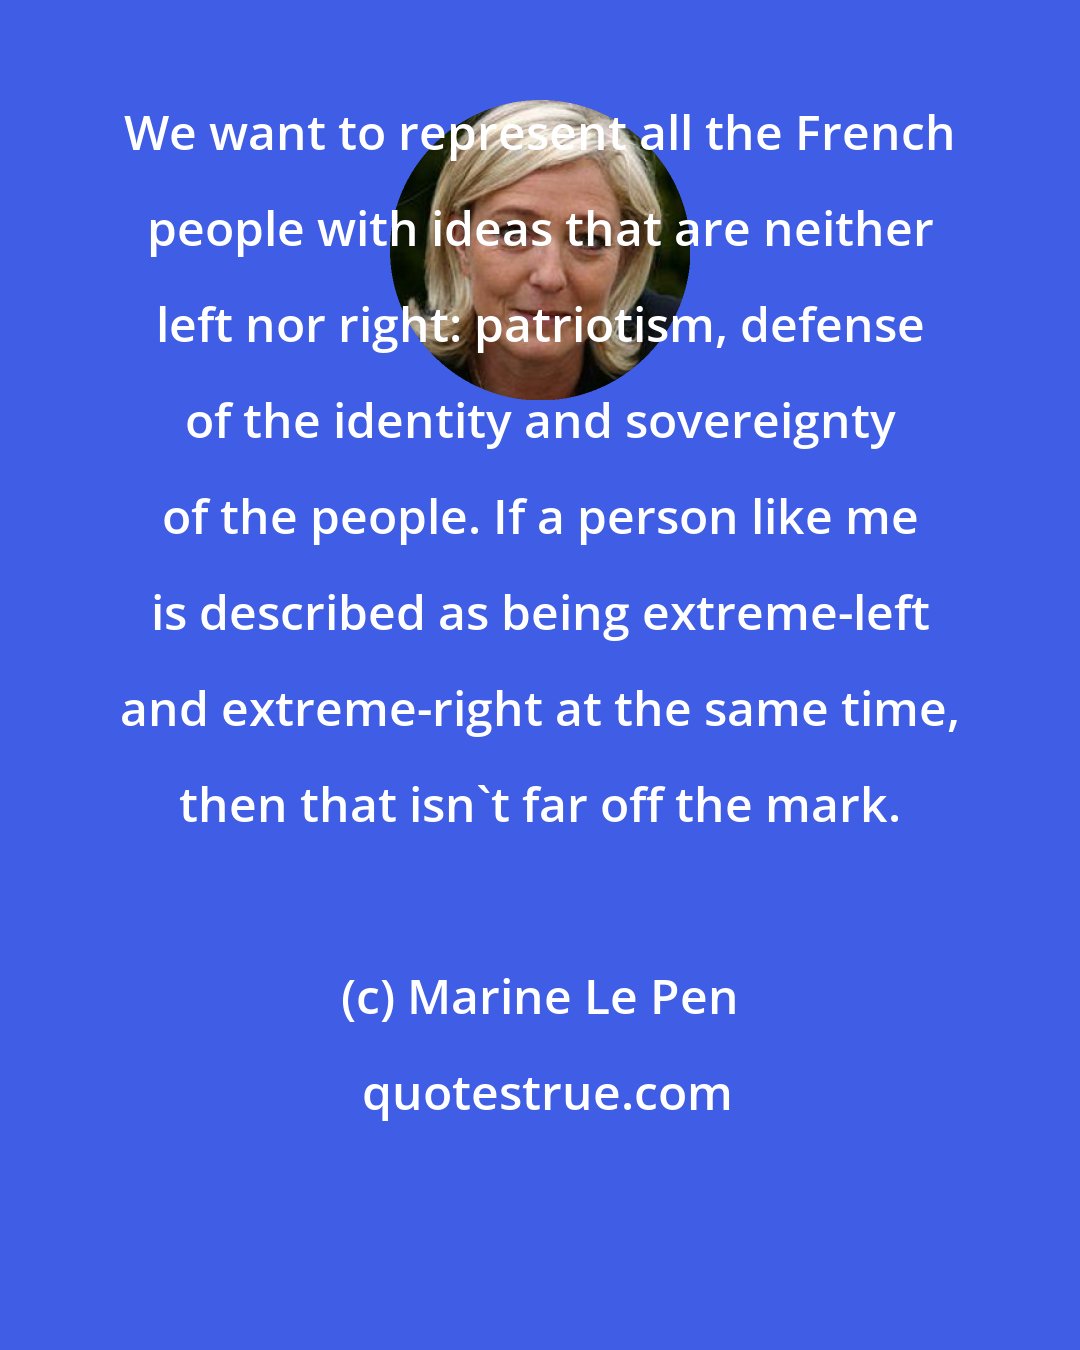 Marine Le Pen: We want to represent all the French people with ideas that are neither left nor right: patriotism, defense of the identity and sovereignty of the people. If a person like me is described as being extreme-left and extreme-right at the same time, then that isn't far off the mark.